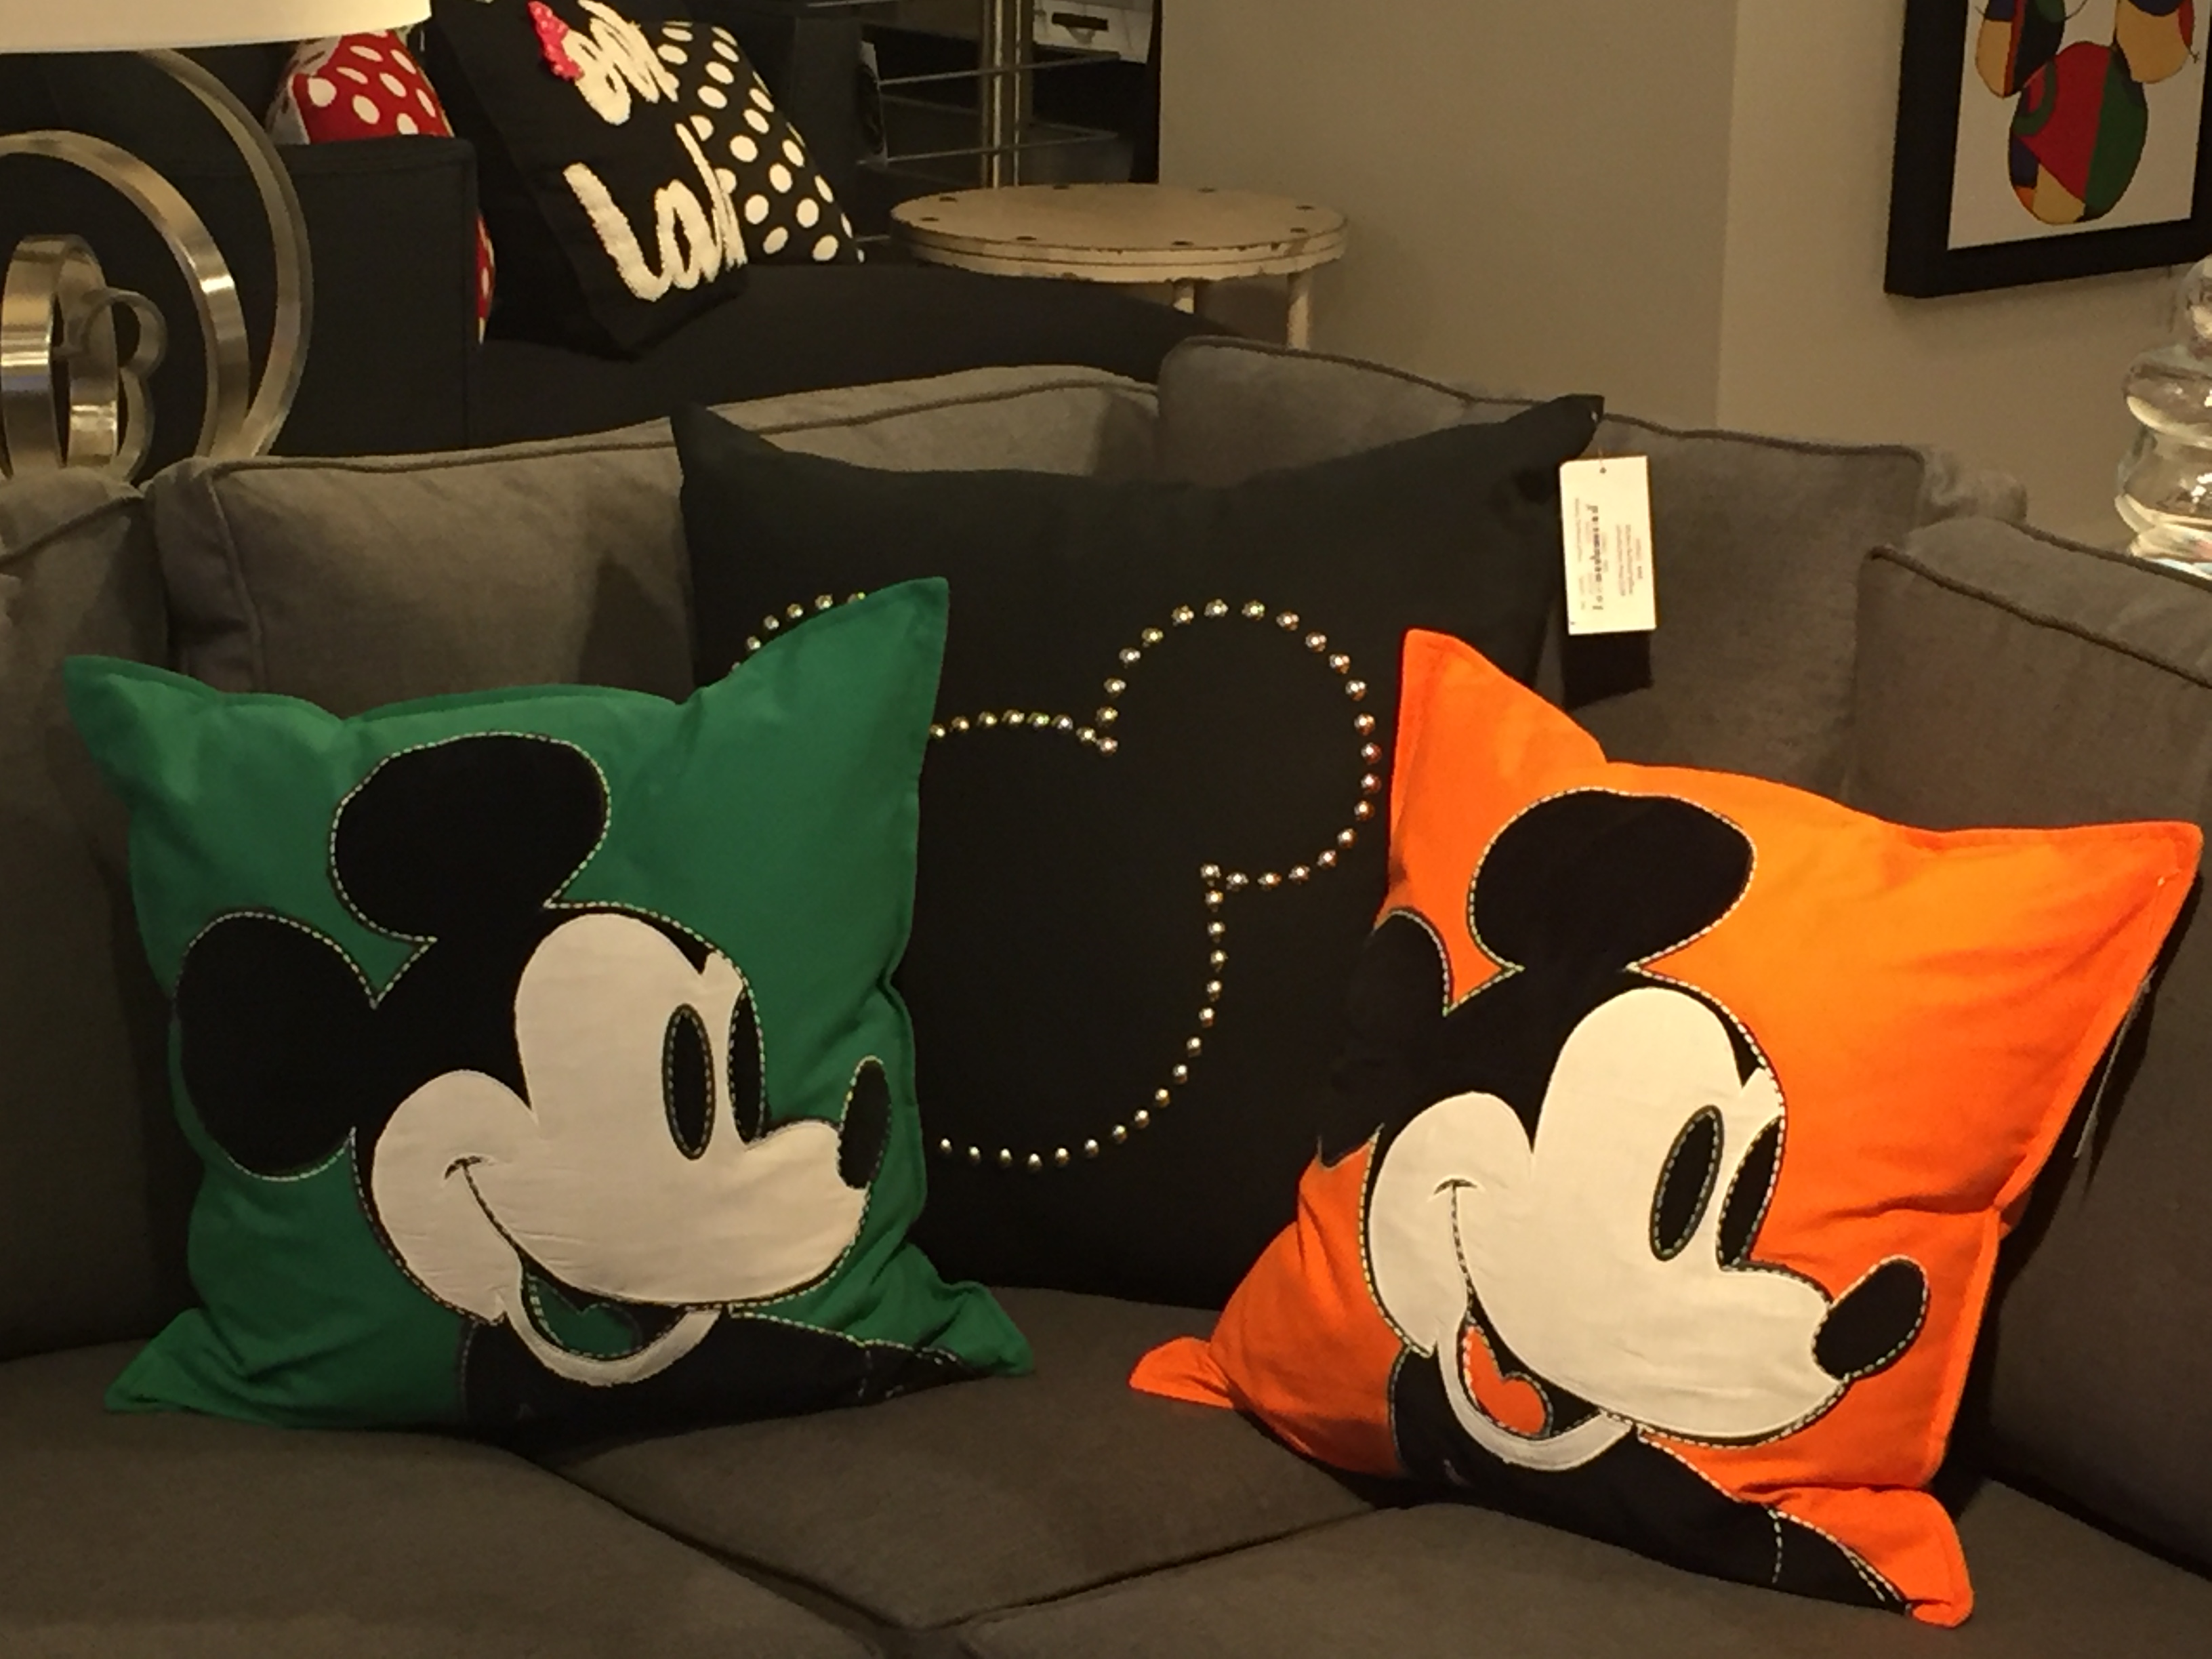 Our favorite pieces from the Ethan Allen x Disney furniture collection